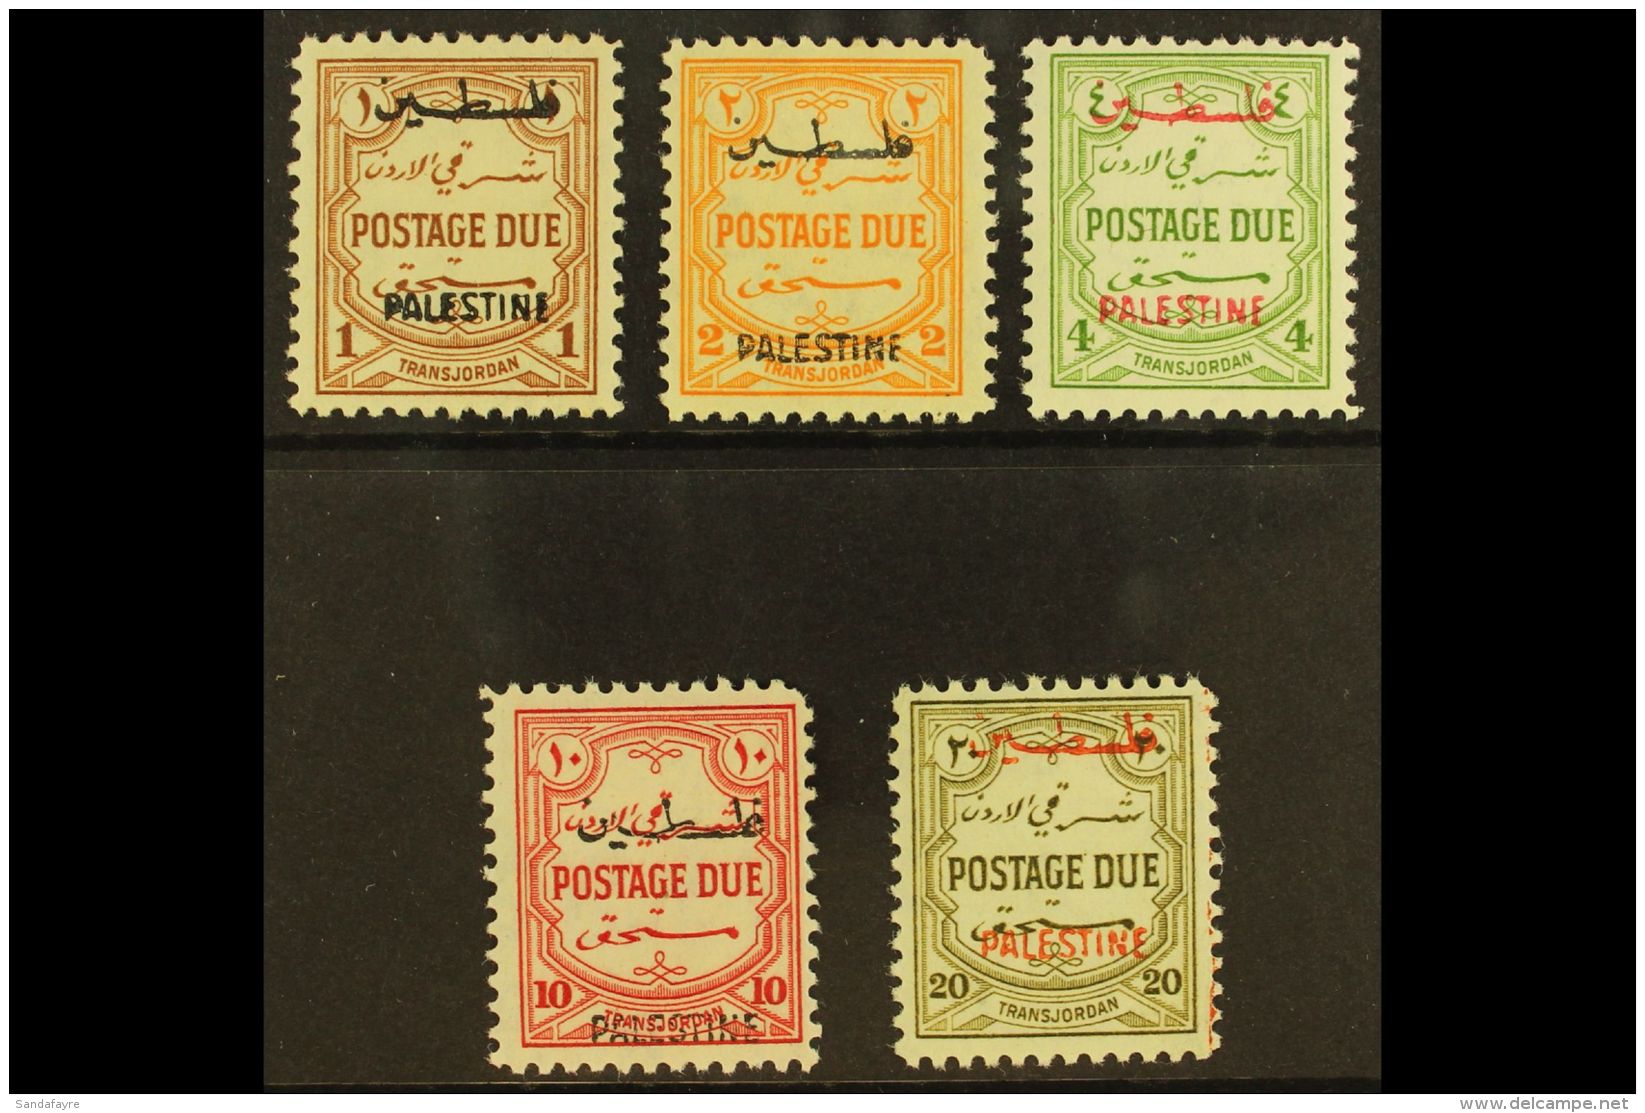 OCCUPATION OF PALESTINE 1948 Postage Due Set, Perf 12, Complete, SG PD25/9, Very Fine And Fresh Mint. (5 Stamps)... - Jordanien